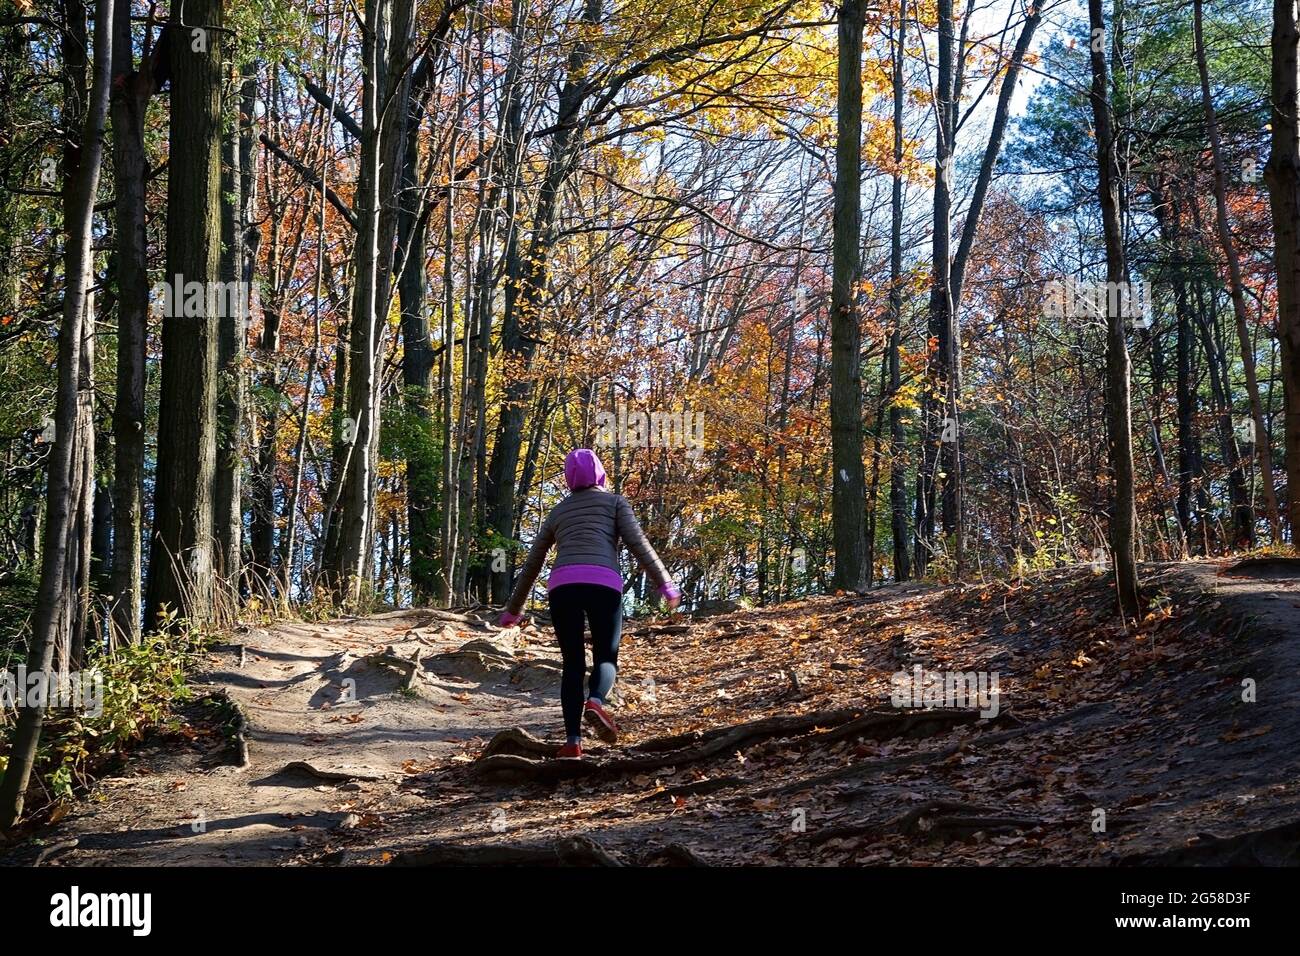 Toronto, Ontario / Canada - October 31, 2020: Teenage girl hiking in the forest with autumn leaf colour Stock Photo